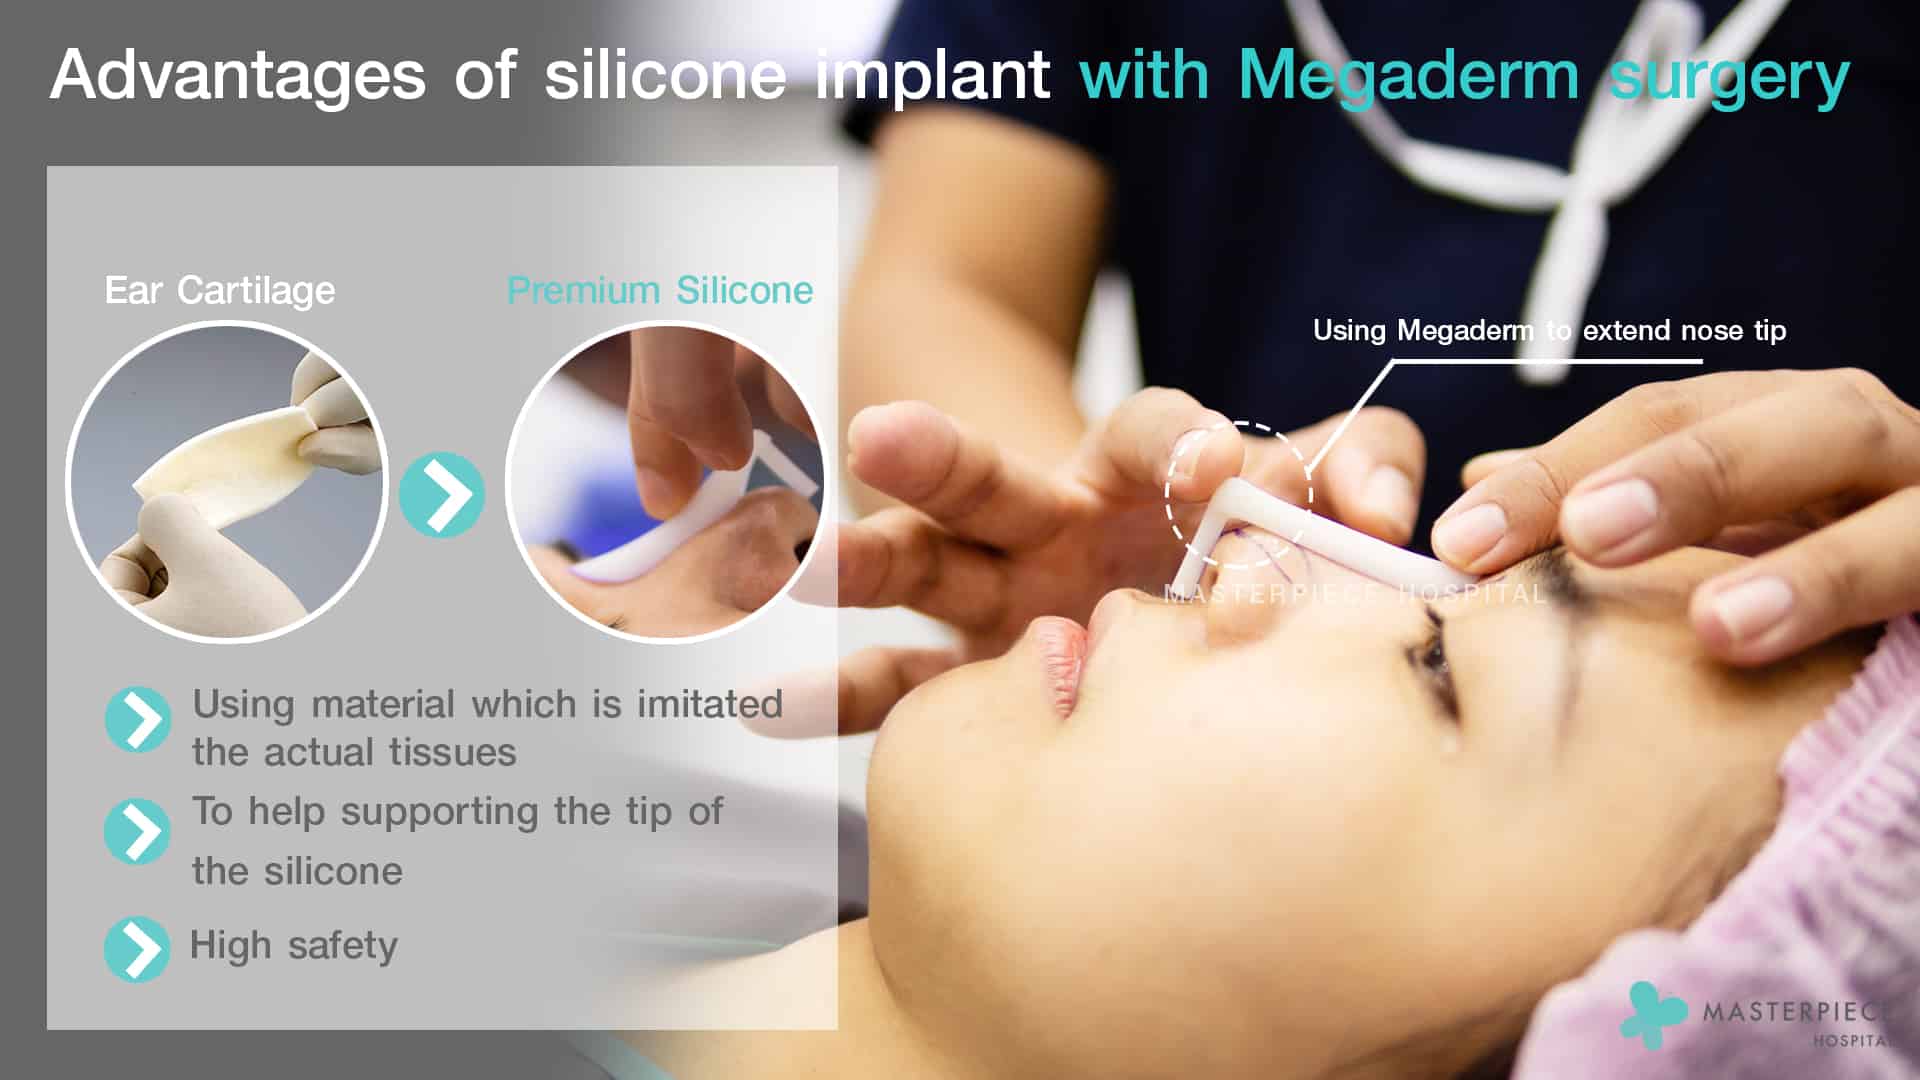 Advantages of silicone implant with Megaderm surgery